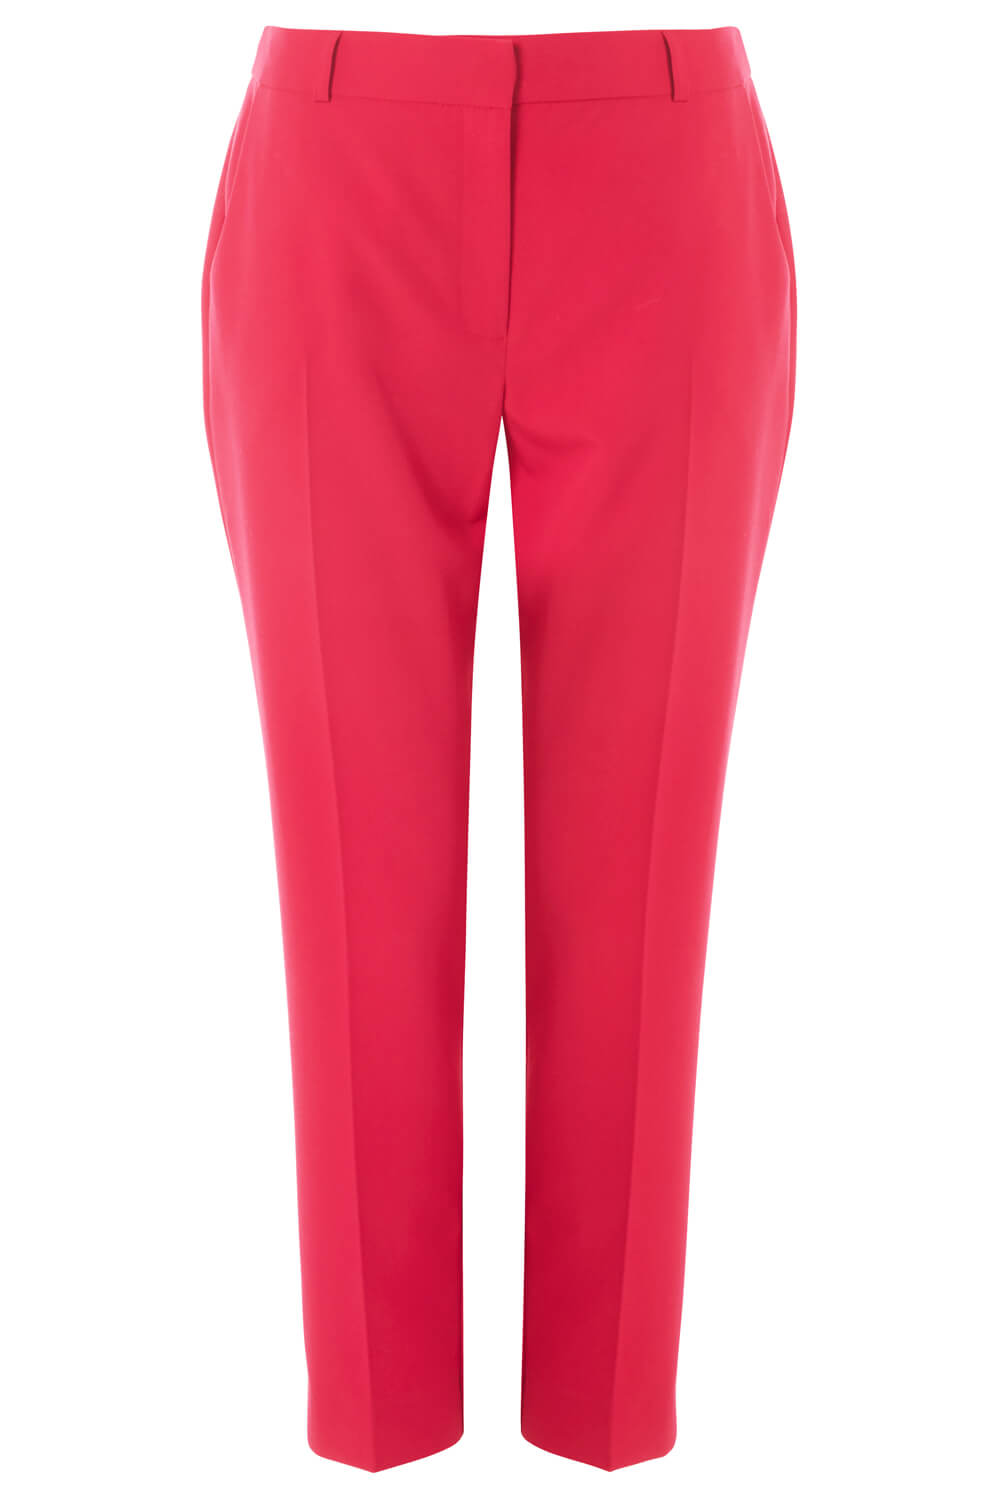 Fuchsia Straight Leg Tapered Trousers, Image 3 of 3